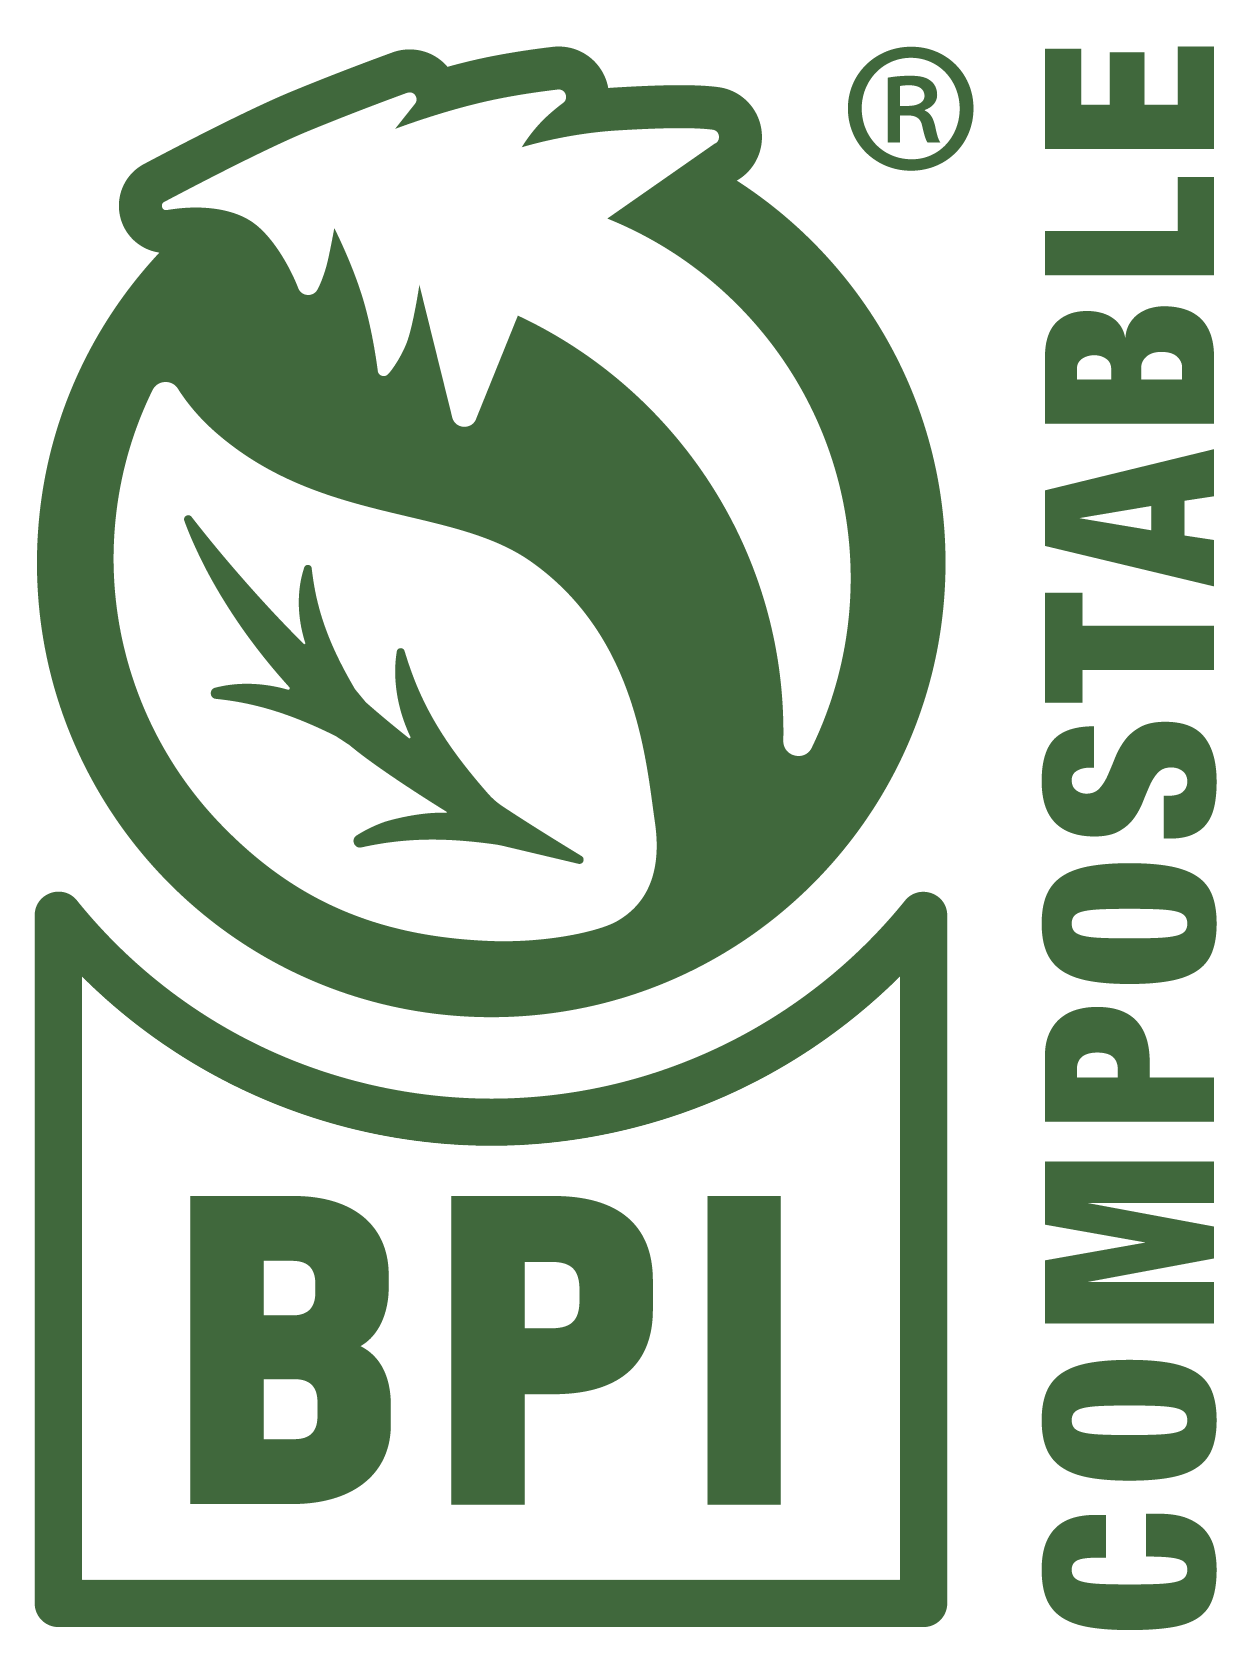 Biodegradable Products Institute logo